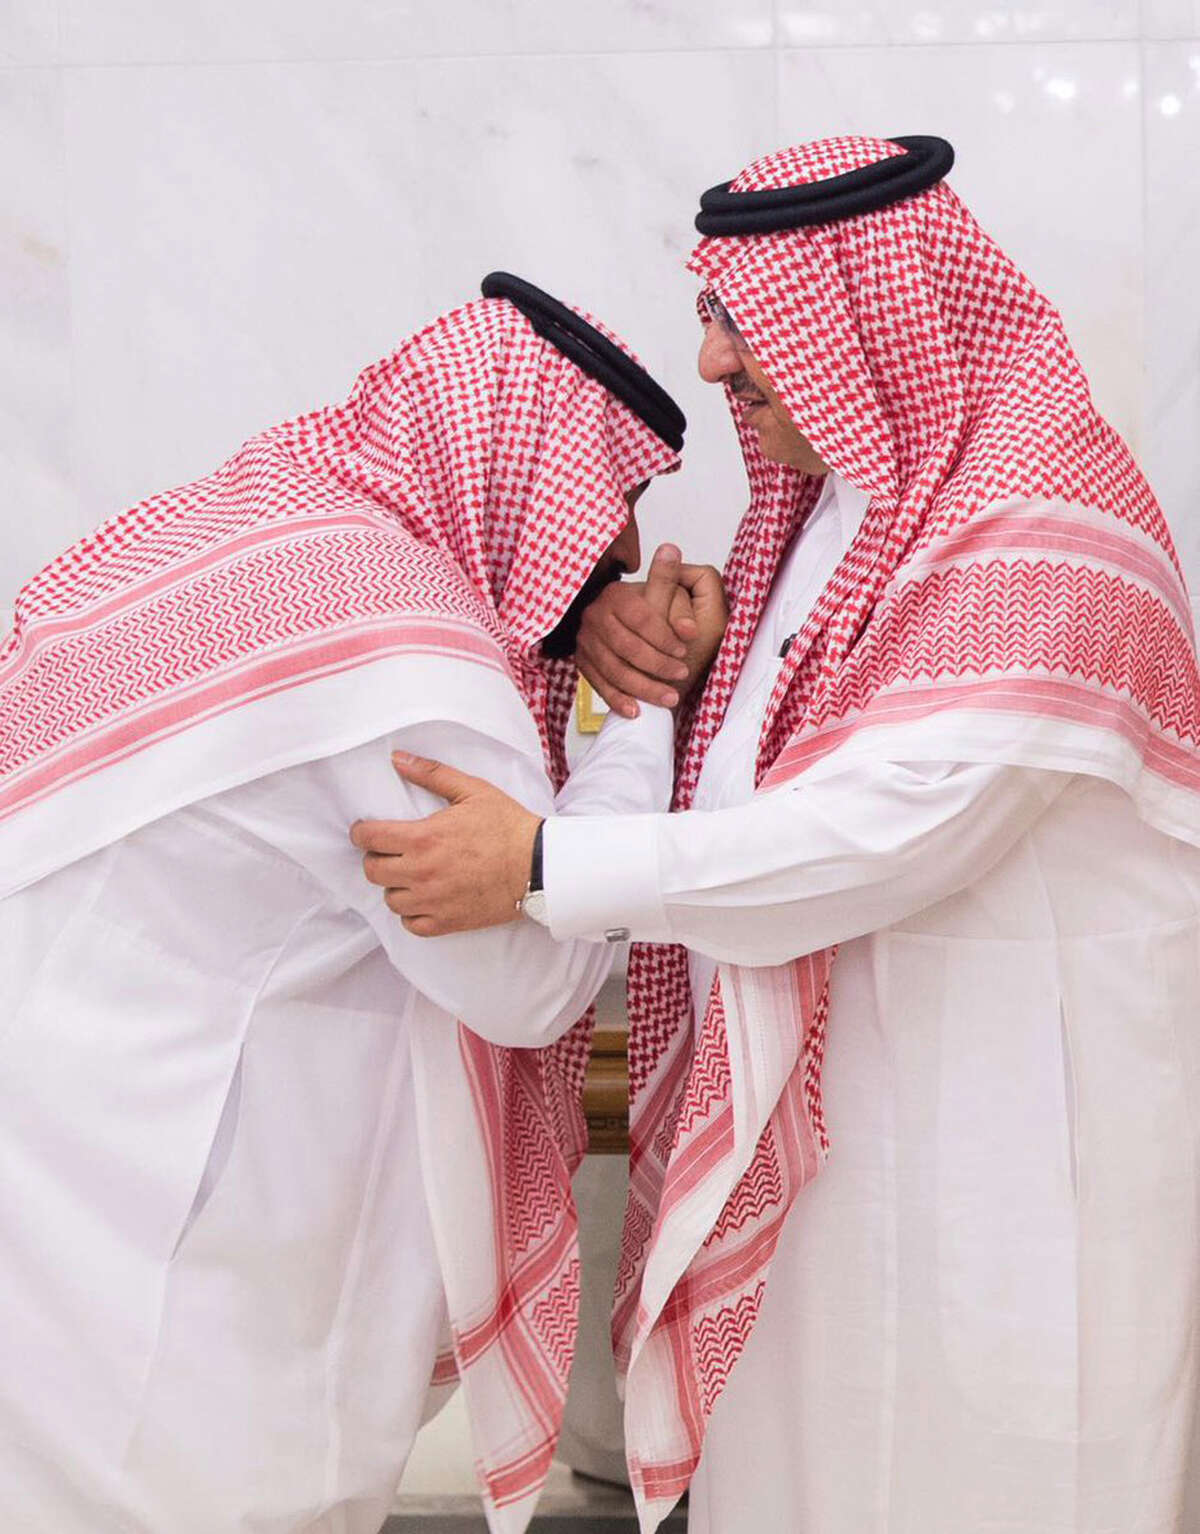 In this Wednesday, June 21 , 2017 photo released by Al-Ekhbariya, Mohammed bin Salman, newly appointed as crown prince, left, kisses the hand of Prince Mohammed bin Nayef at royal palace in Mecca, Saudi Arabia. Saudi Arabia's King Salman on Wednesday appointed his 31-year-old son Mohammed bin Salman as crown prince, placing him first-in-line to the throne and removing the country's counterterrorism czar and a figure well-known to Washington from the line of succession. (Al-Ekhbariya via AP)